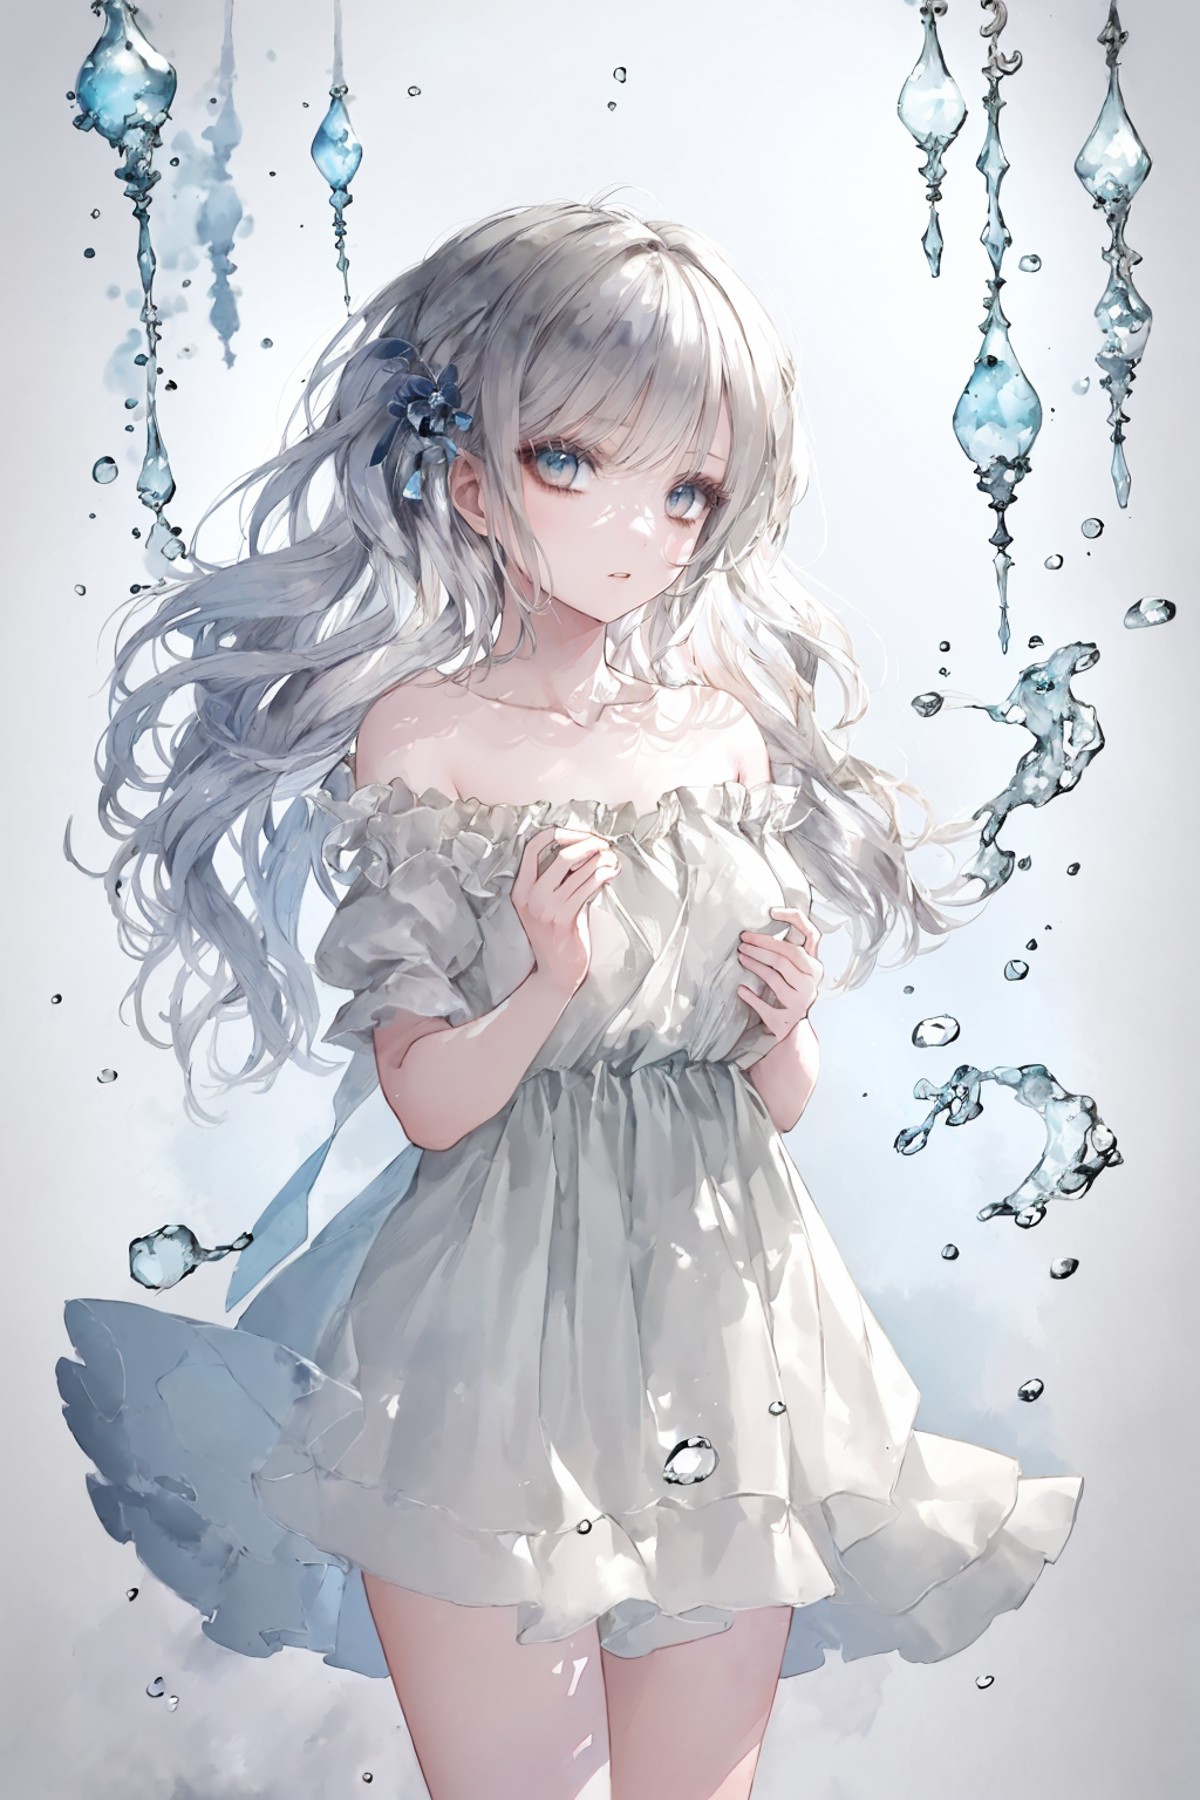 (masterpiece:1.1, highres:1.4) , 1 girl, watercolor style, (soft blending:1.2) , fluid colors, dreamy washes, delicate tex...